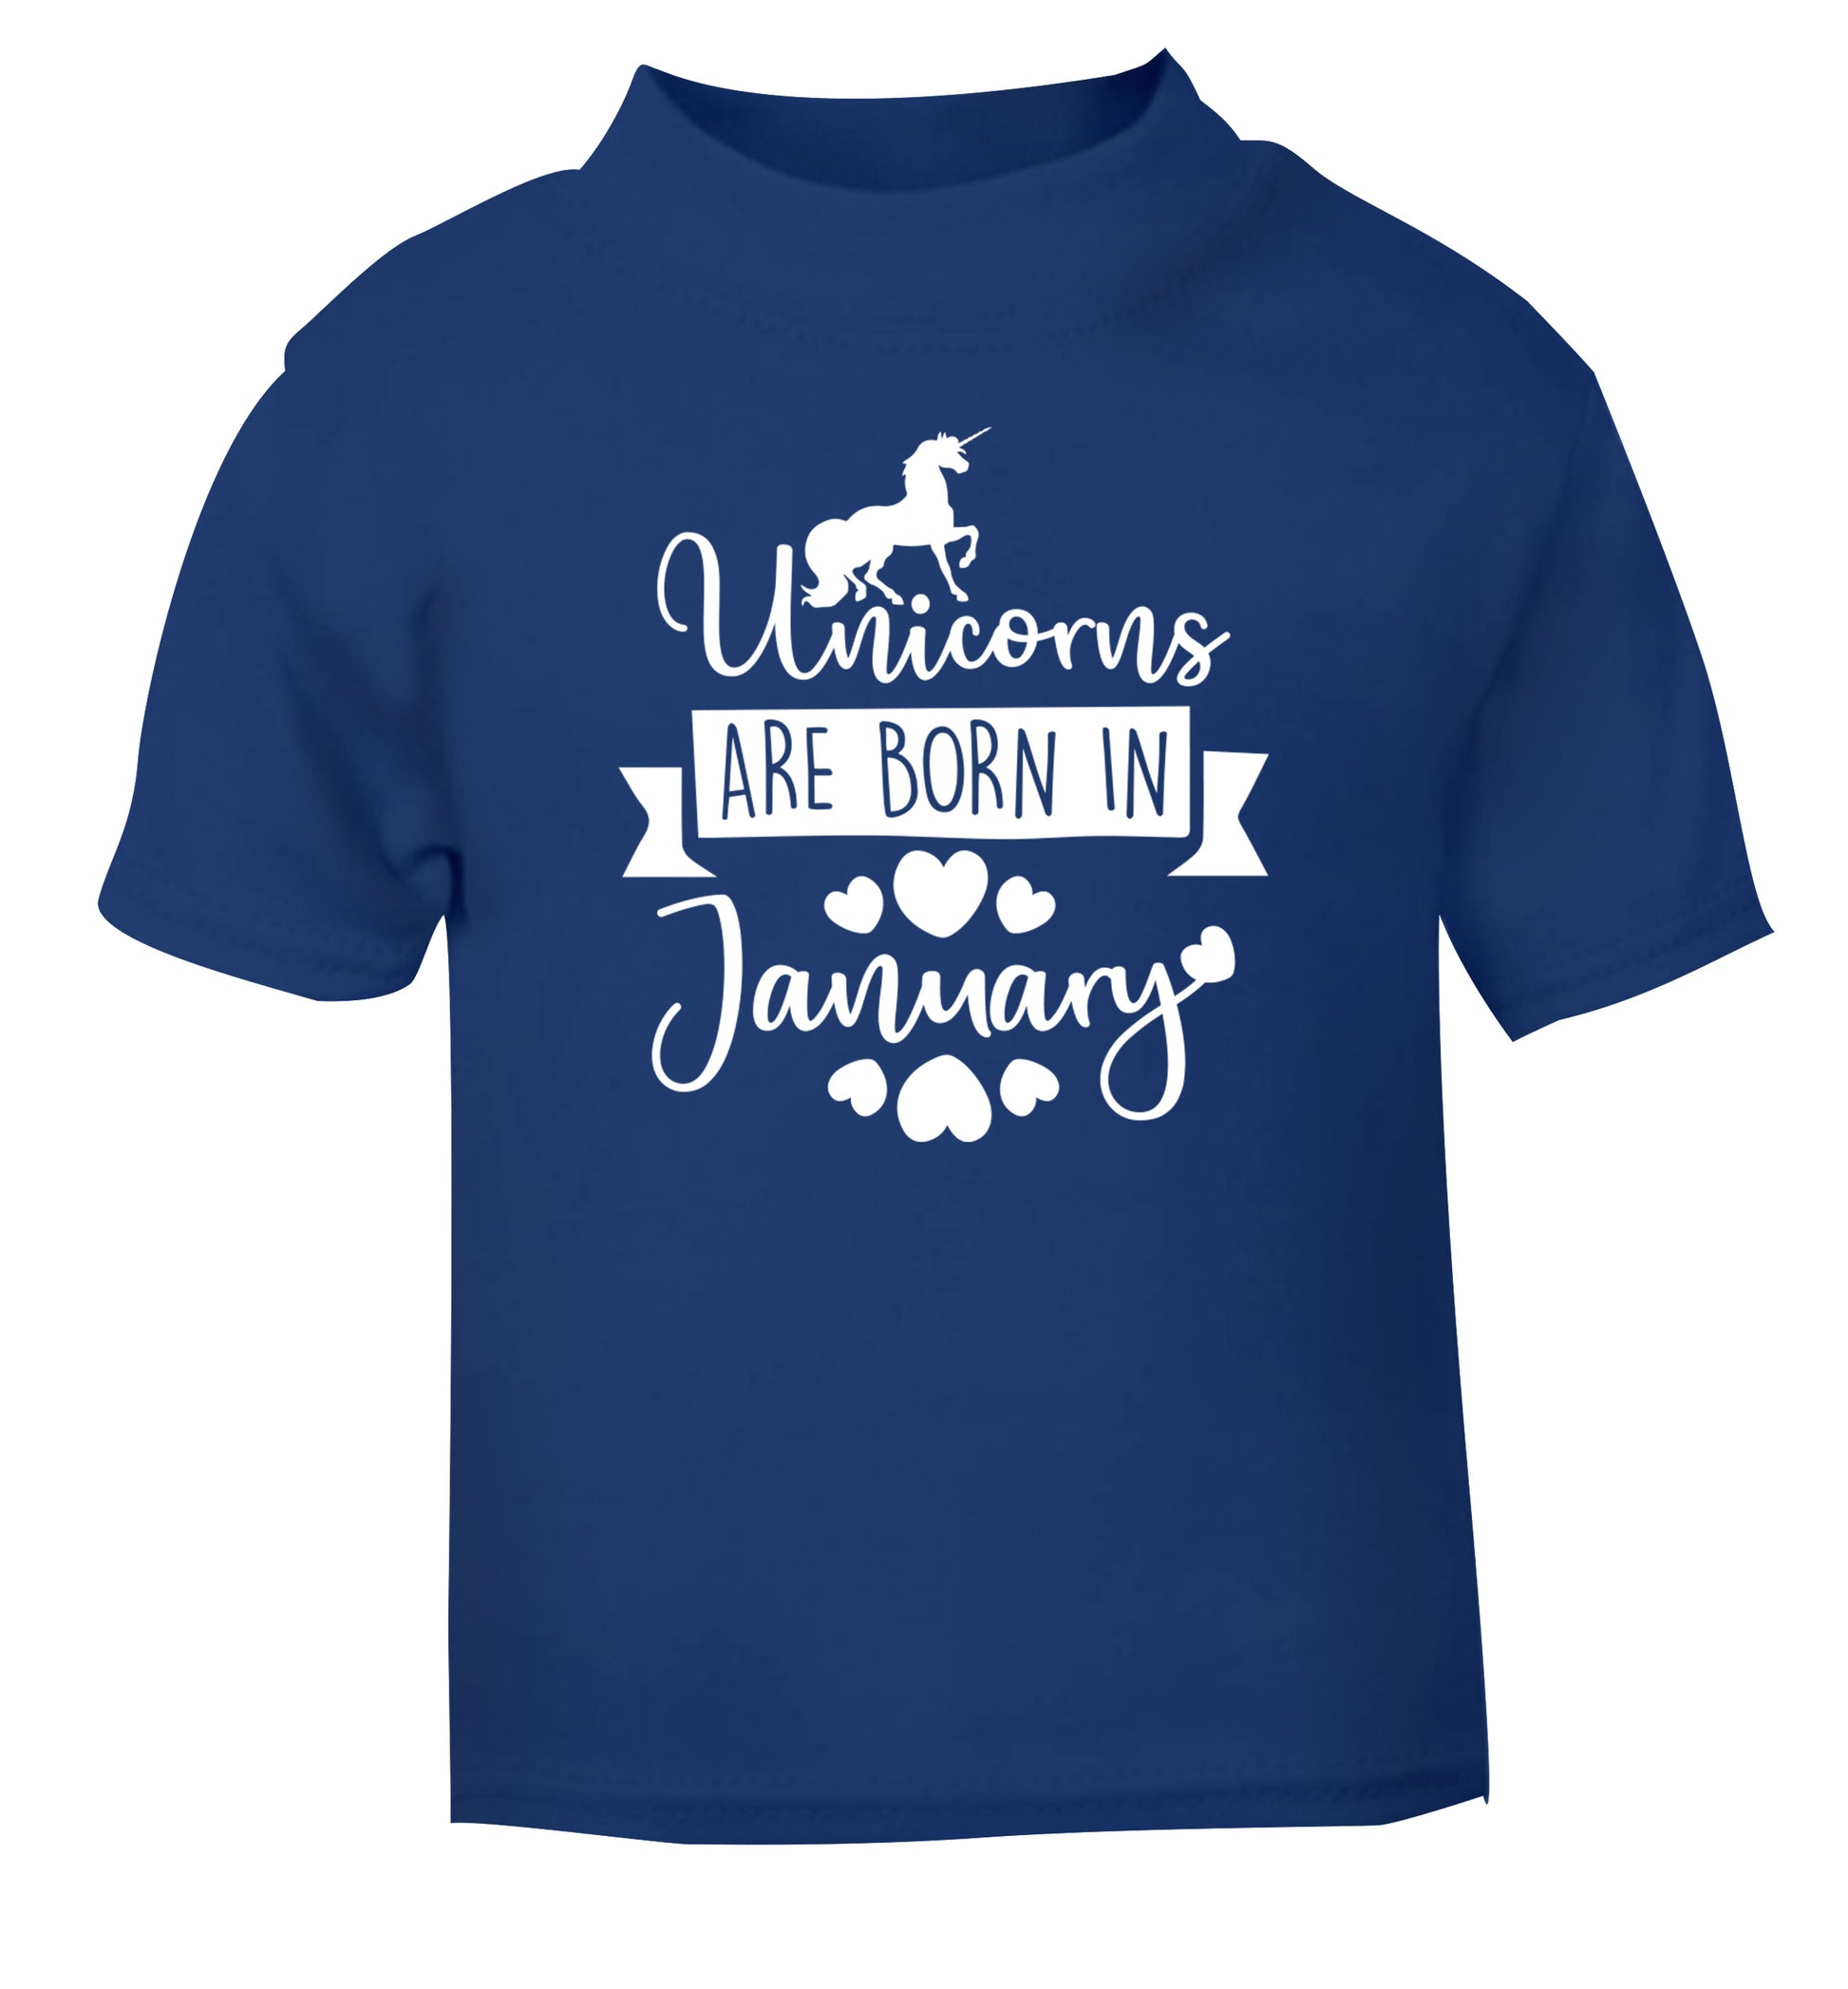 Unicorns are born in January blue Baby Toddler Tshirt 2 Years